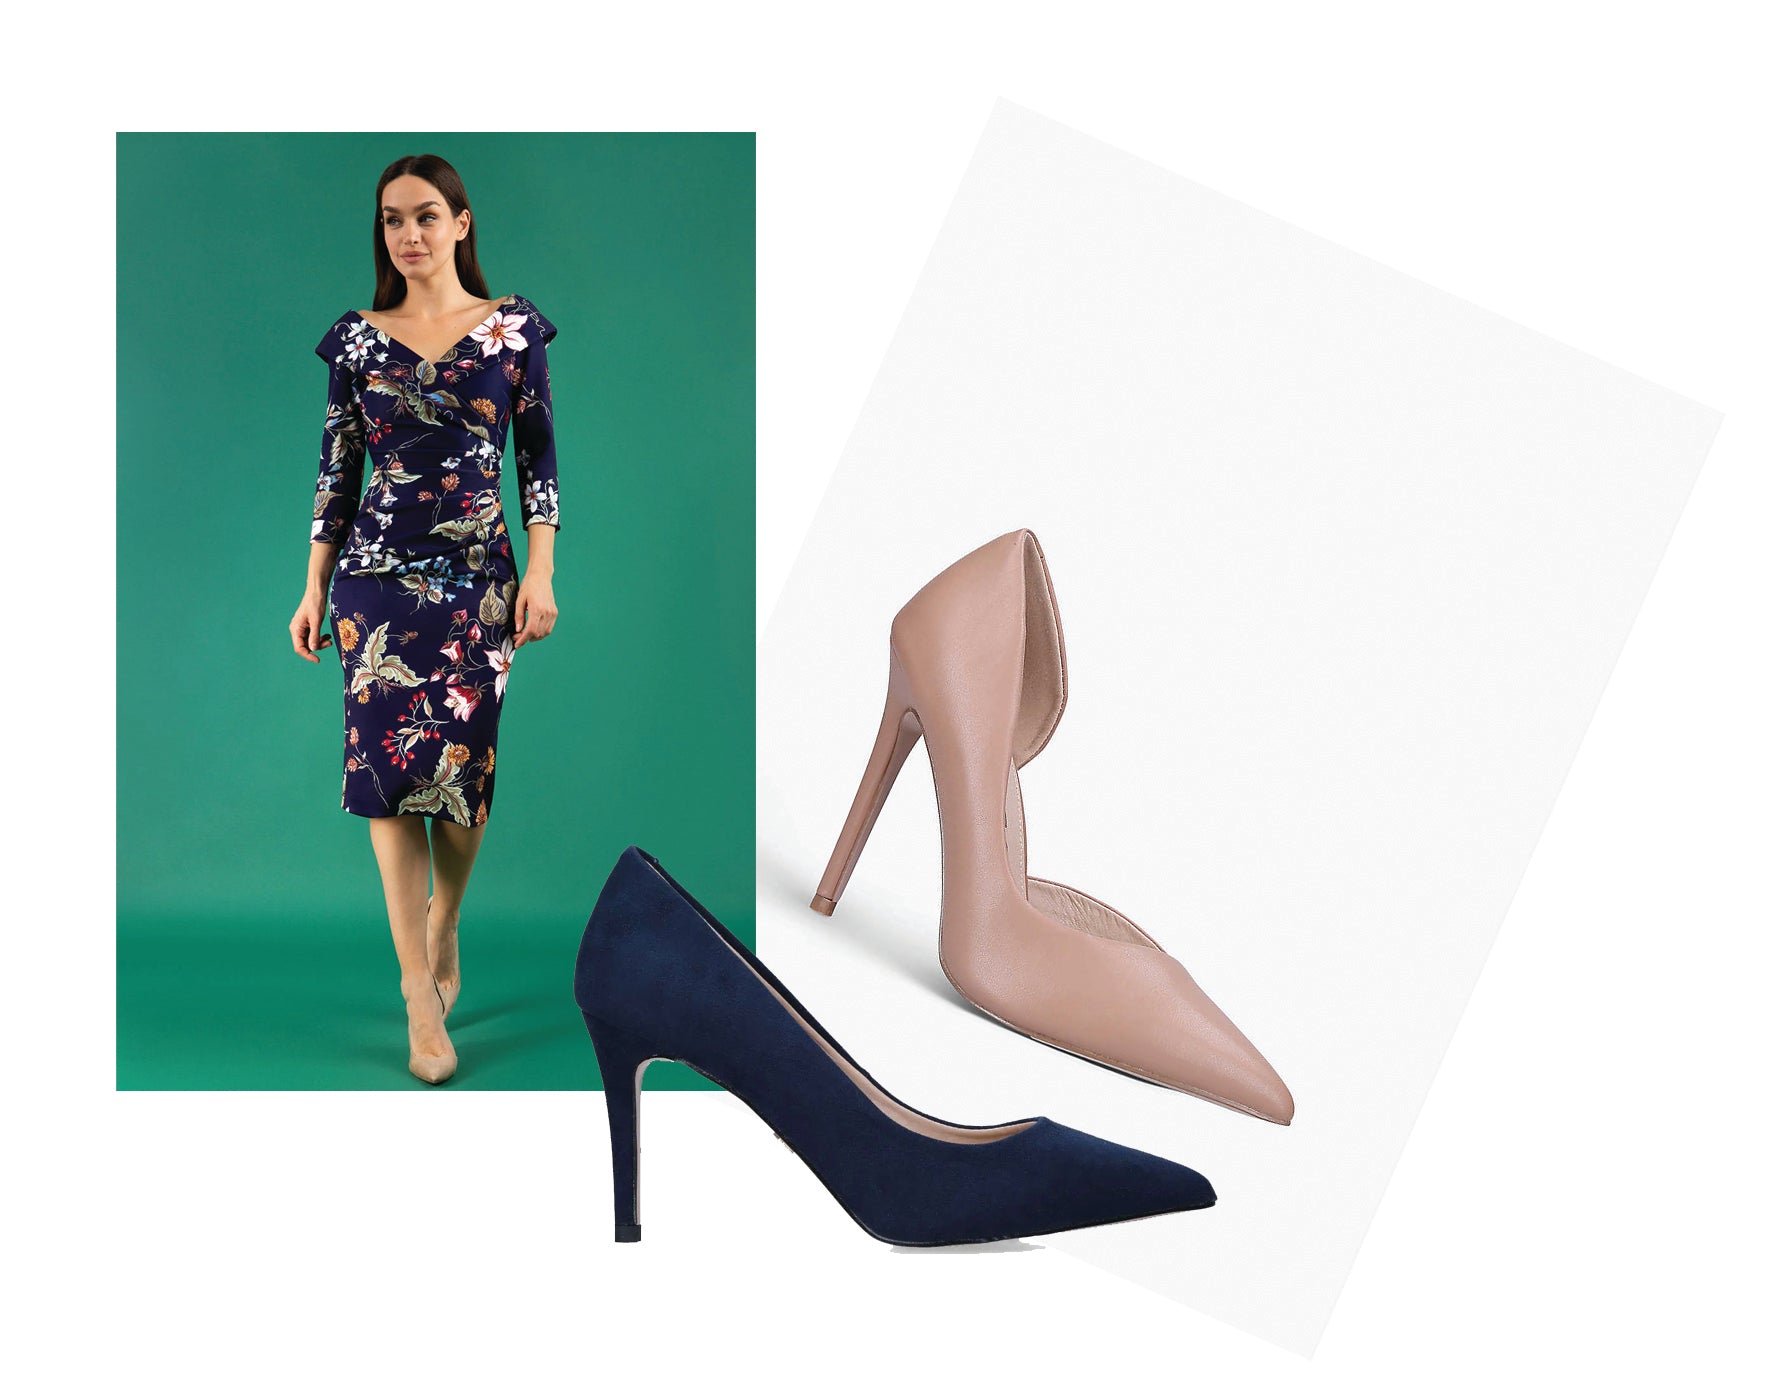 a collage of images showing the Eliza 3/4 dress from Diva Catwalk and two shoes in nude/camel and navy.